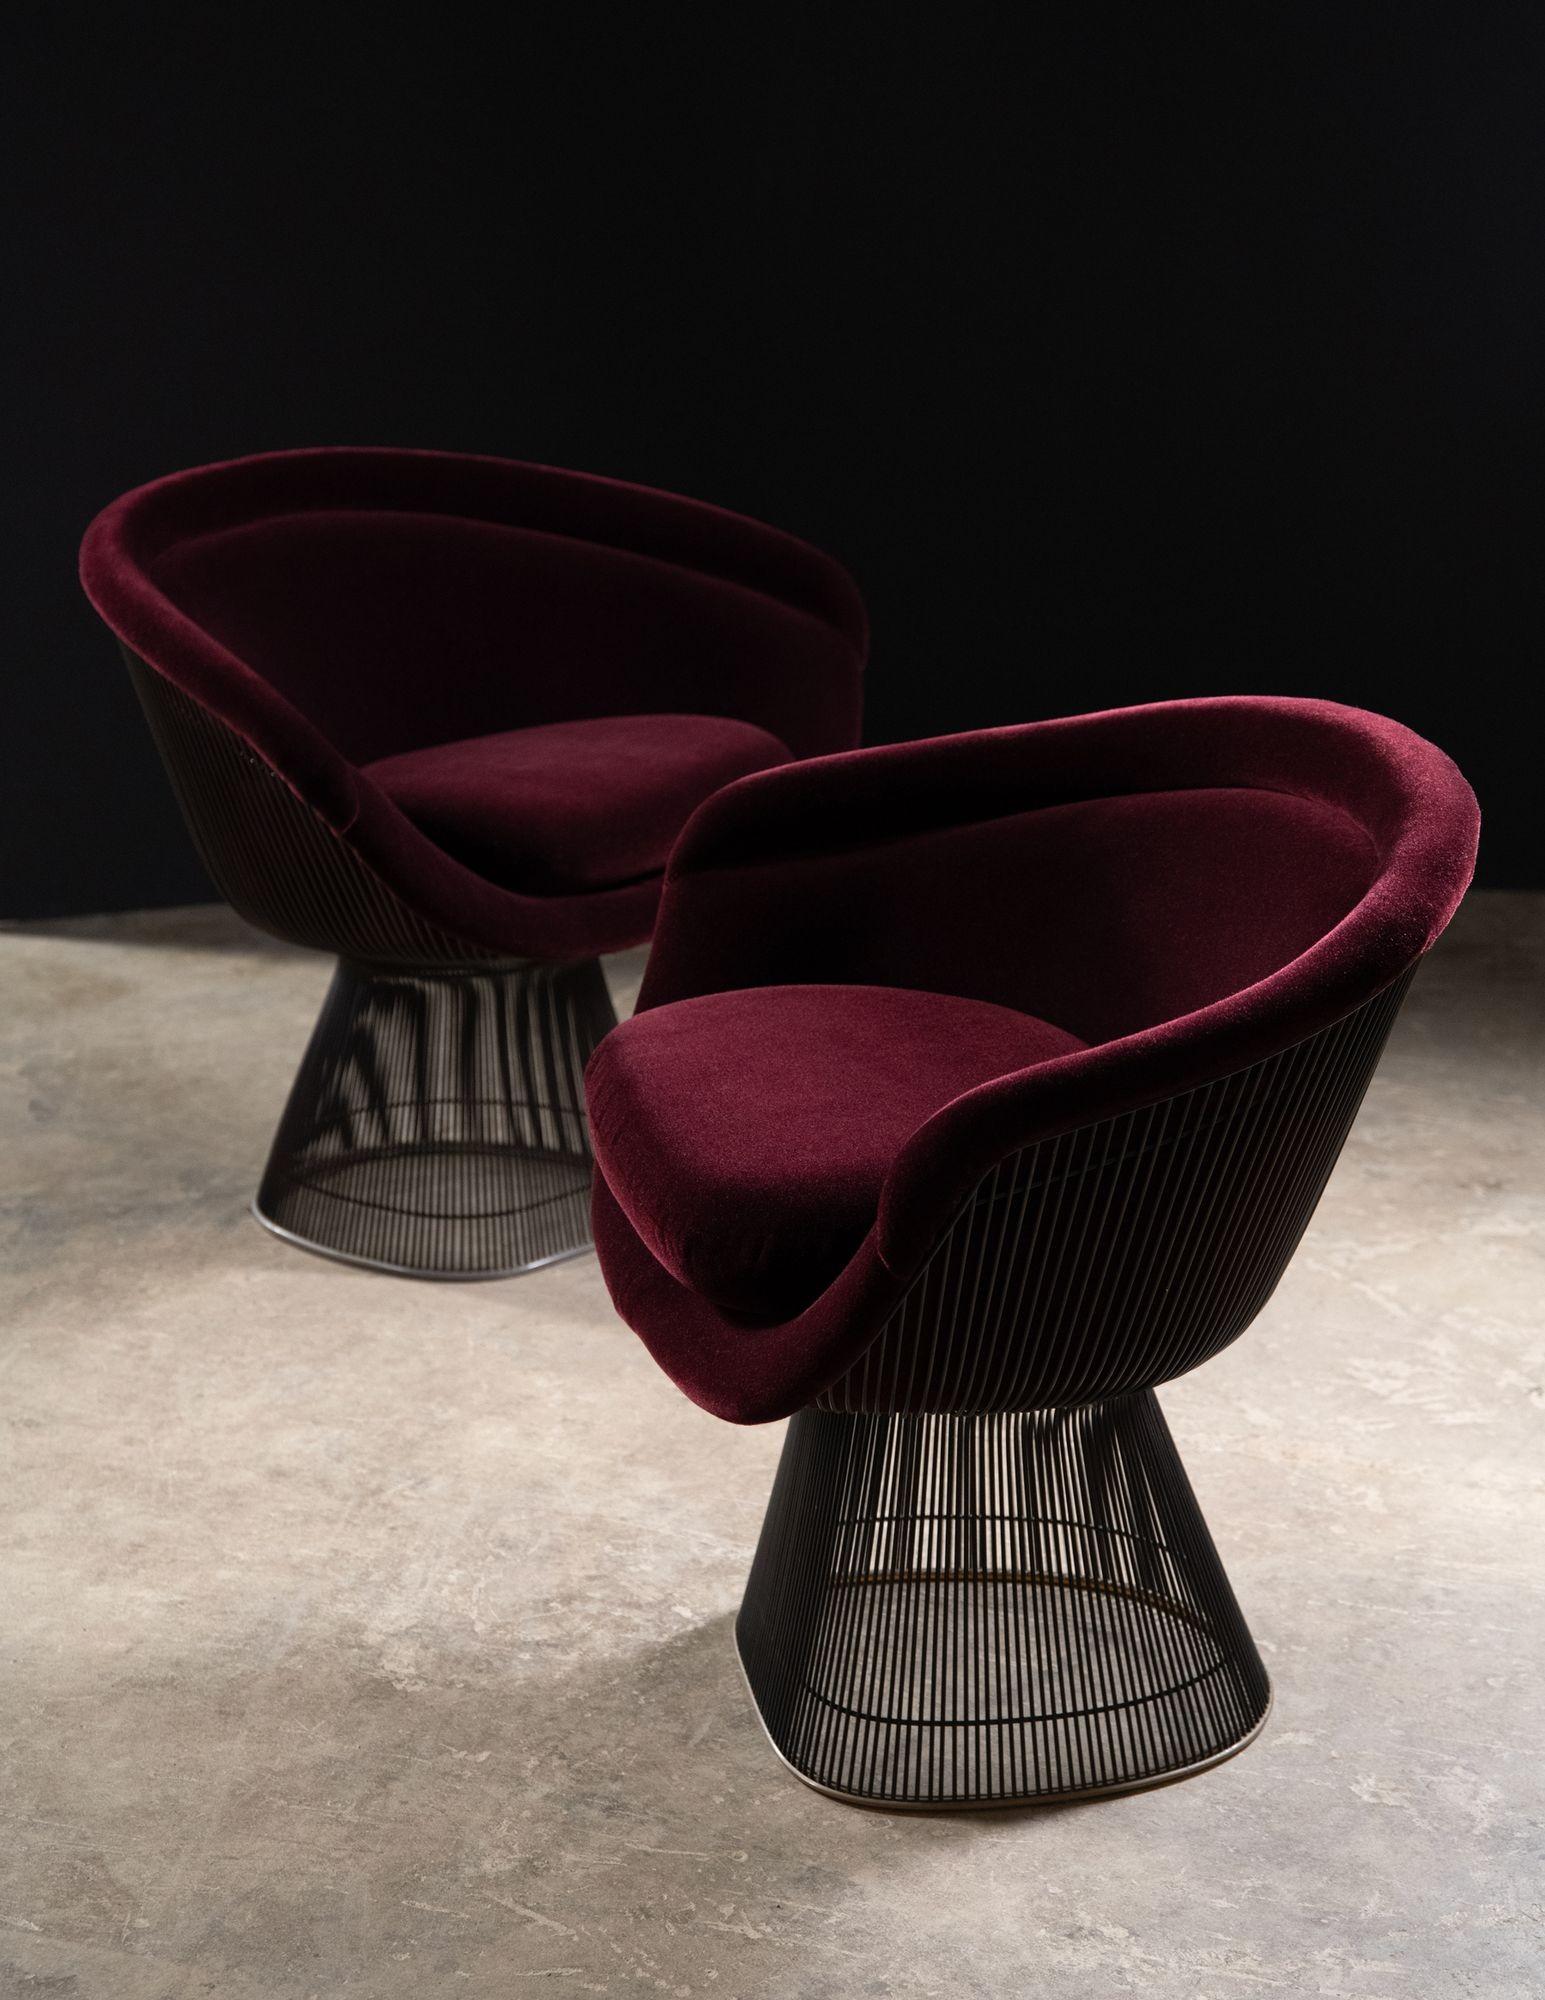 Rare, early production lounge chairs designed by Warren Platner from The Platner Collection in bronze, 1966 for Knoll International. Lounge chairs are in excellent condition with new foam and with a new Knoll mohair velvet upholstery.